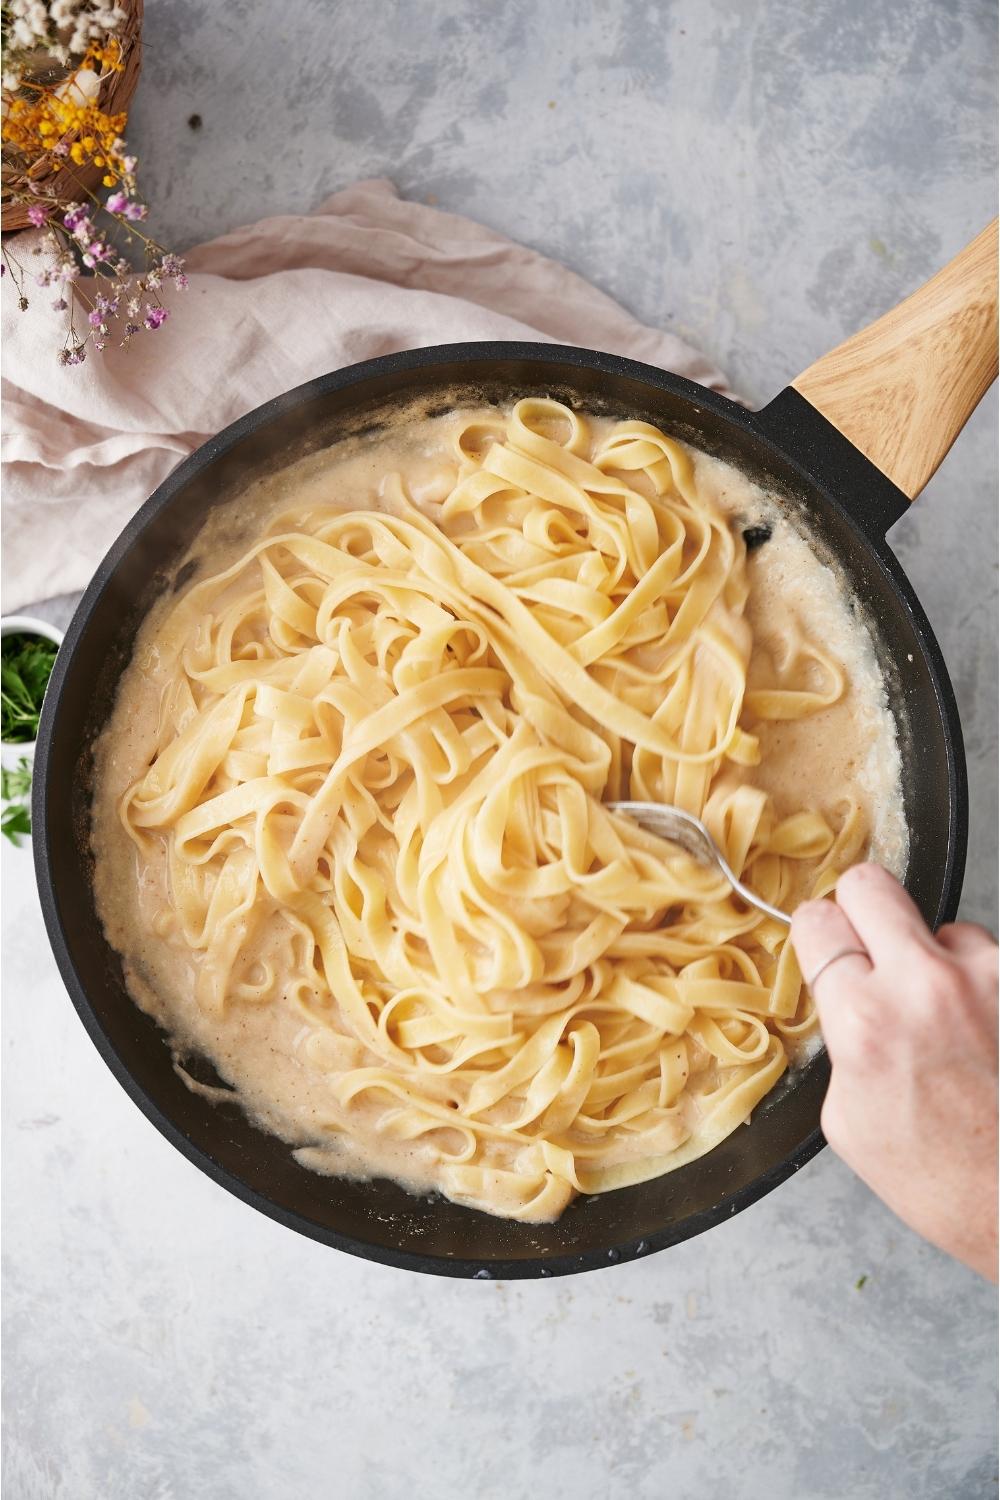 A pan with finished alfredo sauce and cooked noodles being stirred up with a hand holding a spoon.